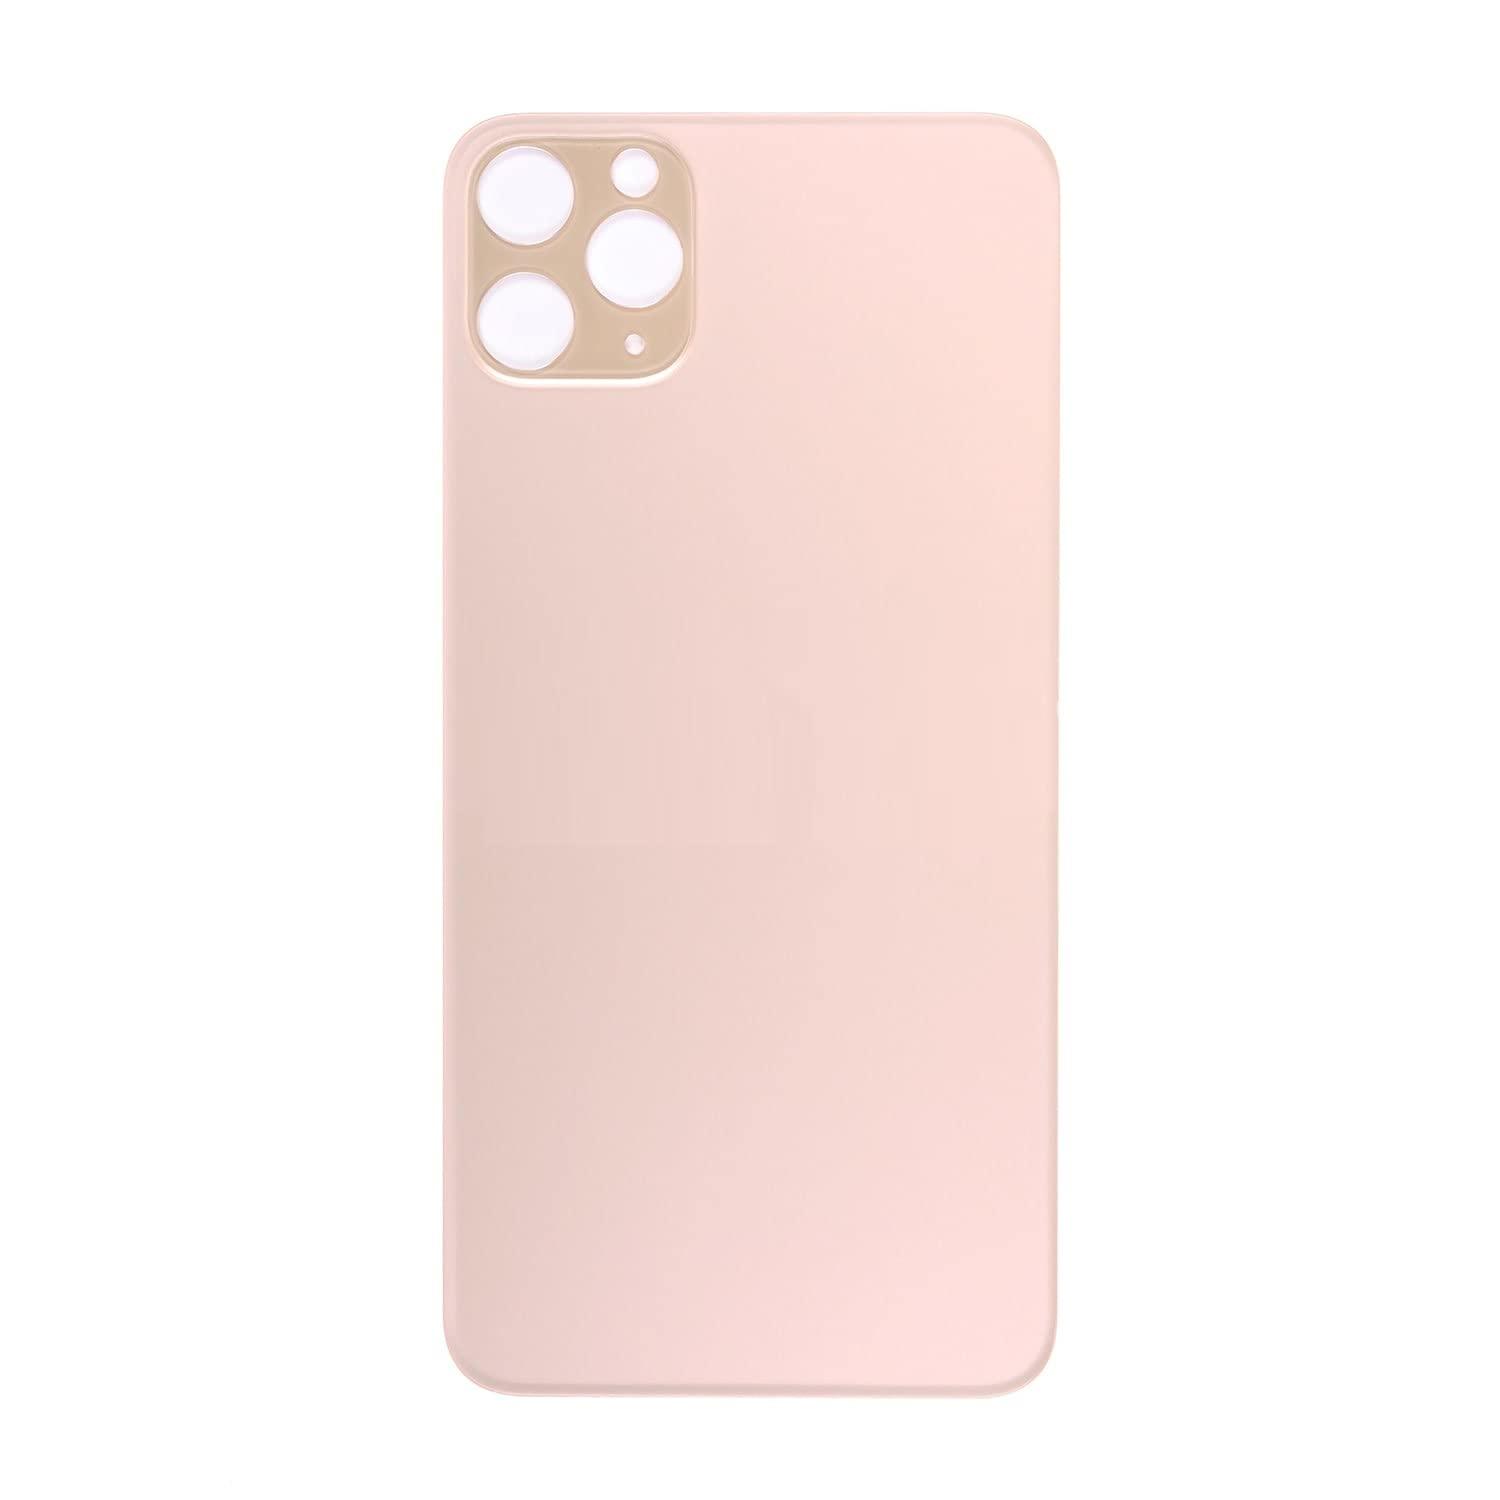 Back Glass Panel for Apple iPhone 11 Pro Max Gold